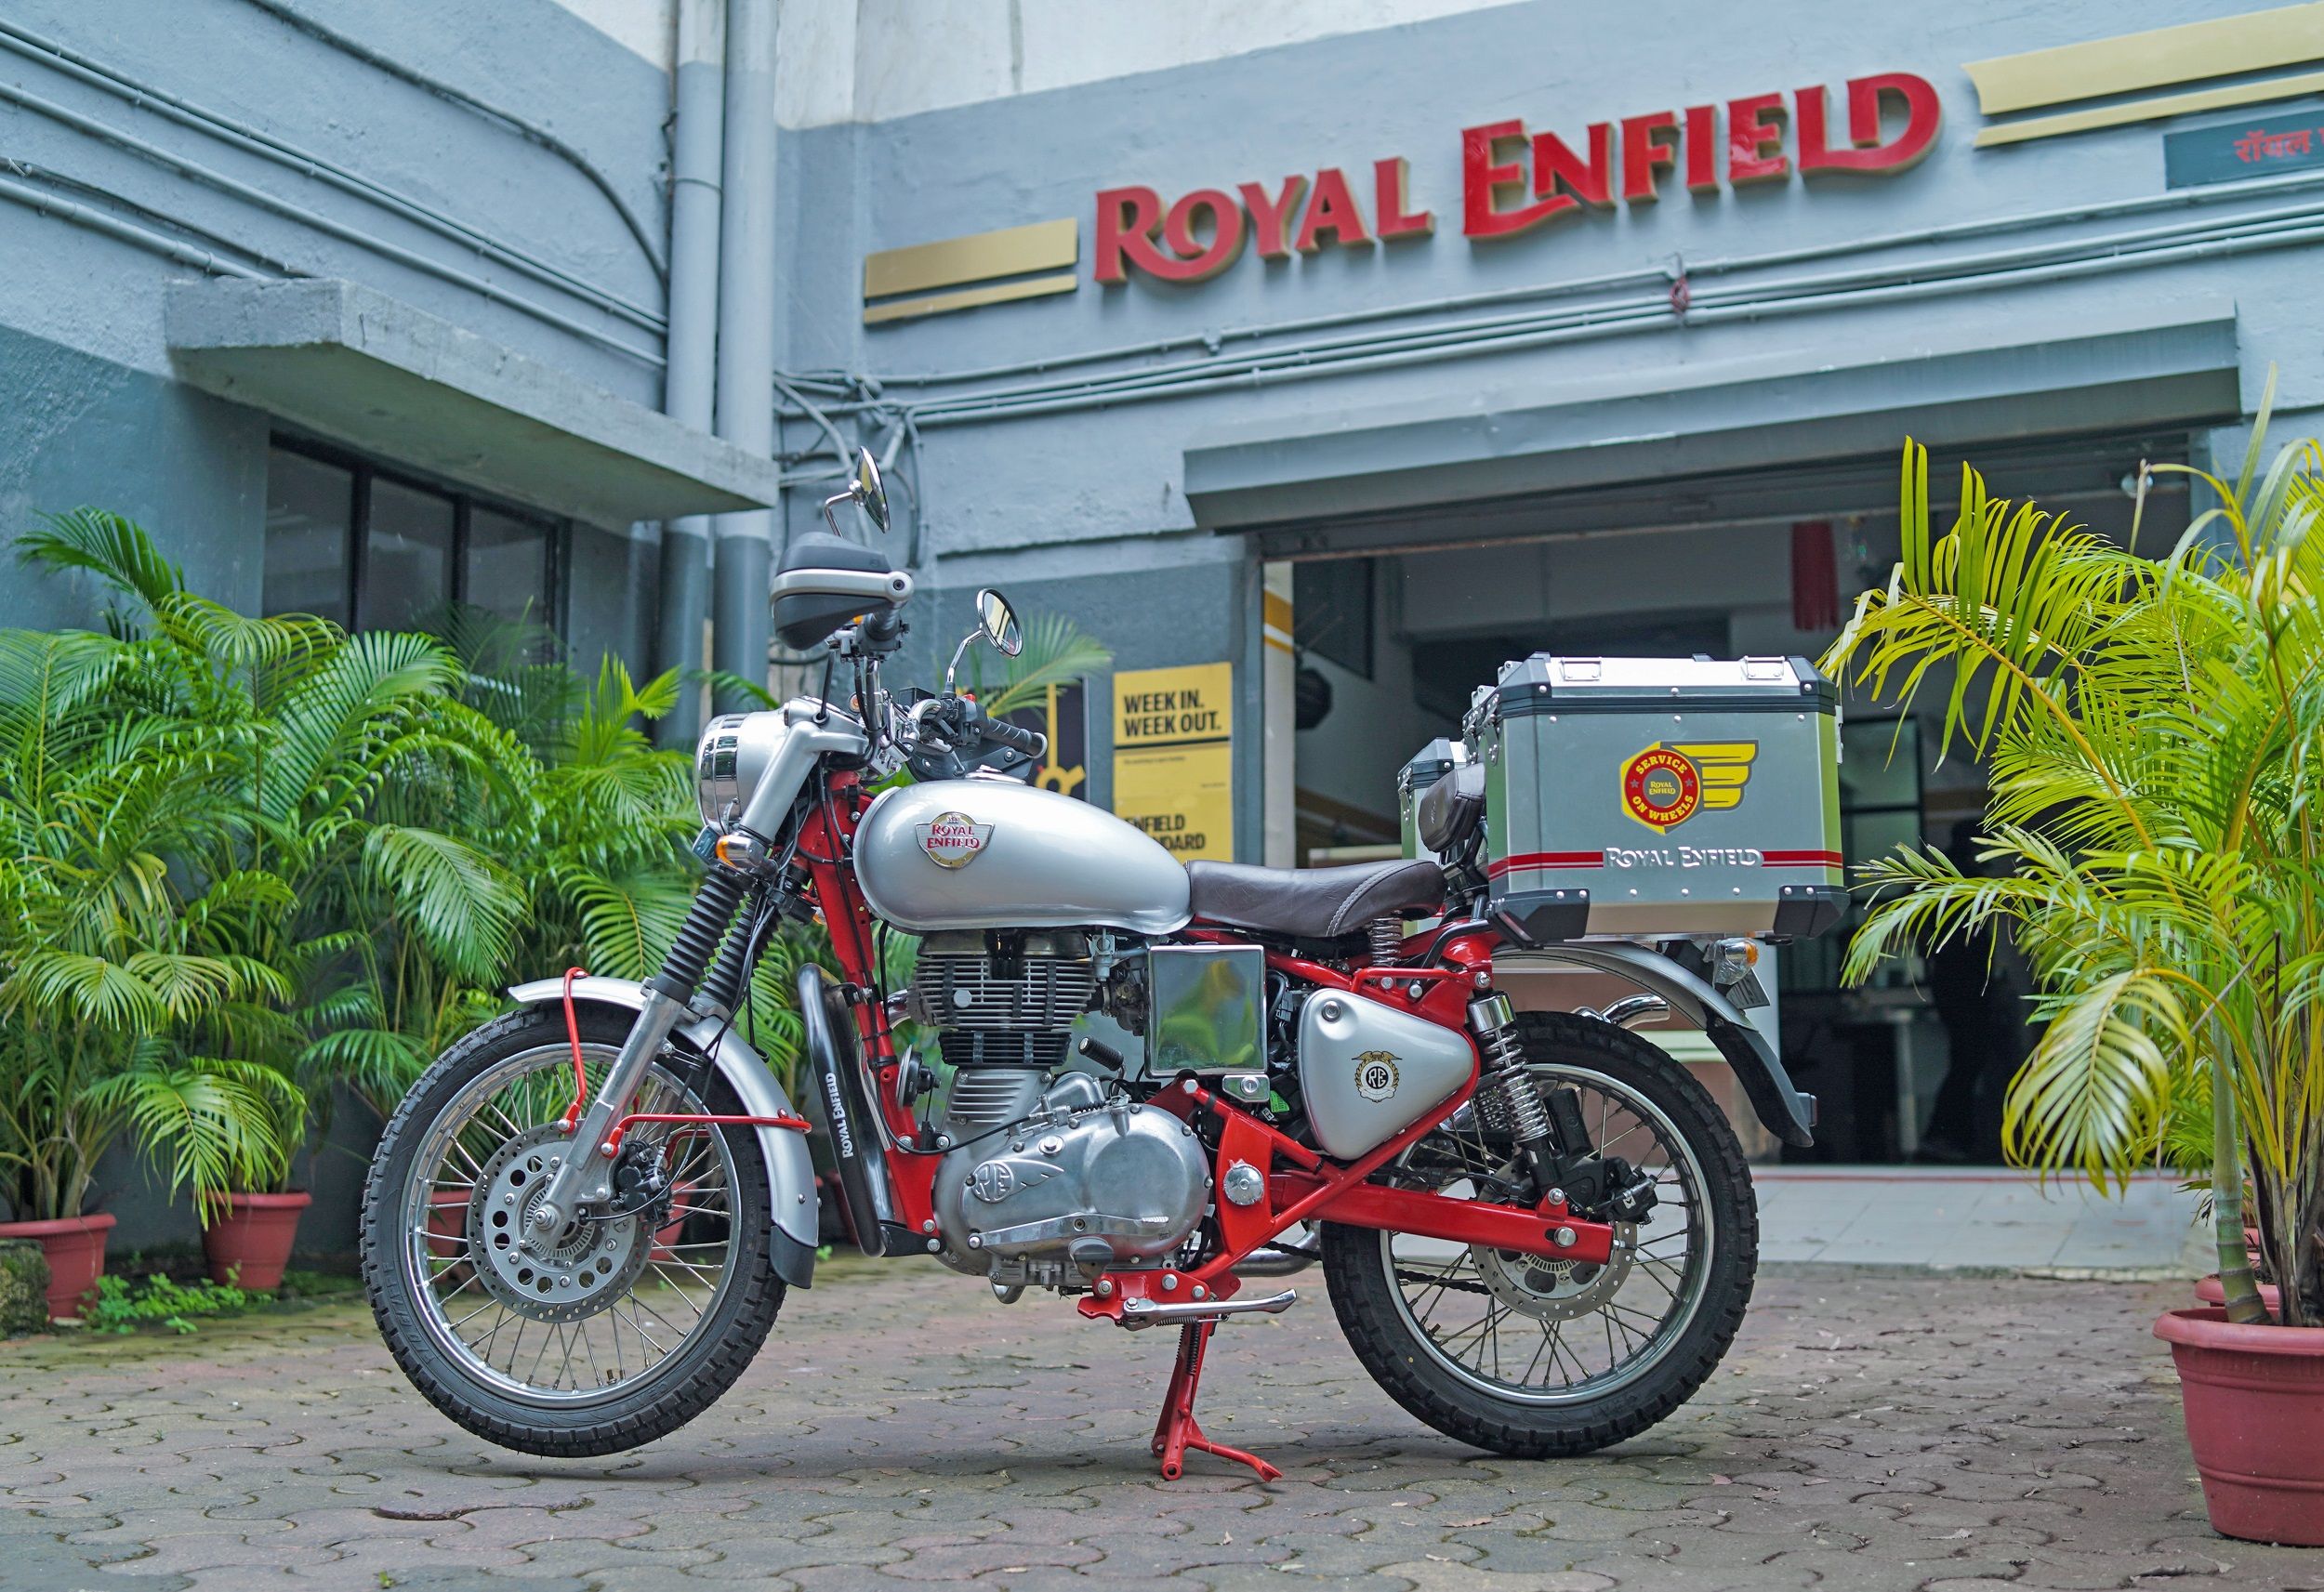 Royal Enfield To Offer Hassle-free Bike Service At Your Doorstep